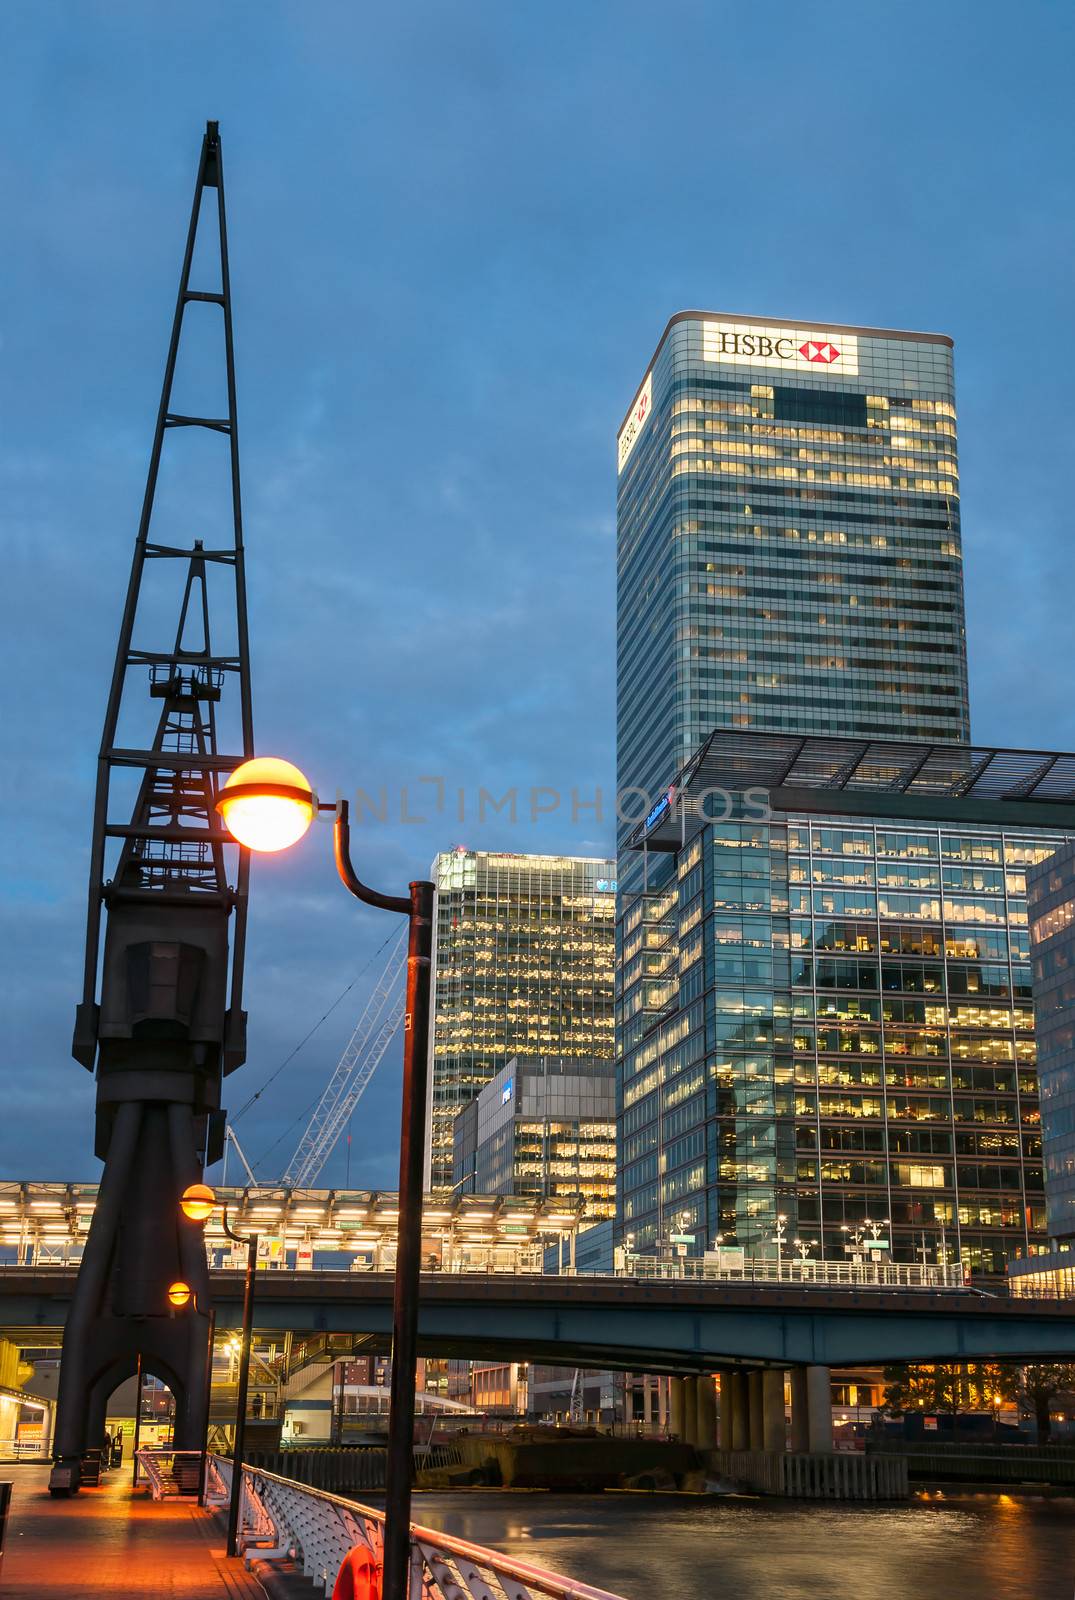 London, United Kingdom - May 9, 2011: HSBC's world Head Quarters building and old port cranes at Canary Wharf. It is part of the redevelopment around Canary Wharf in the London Docklands at night.